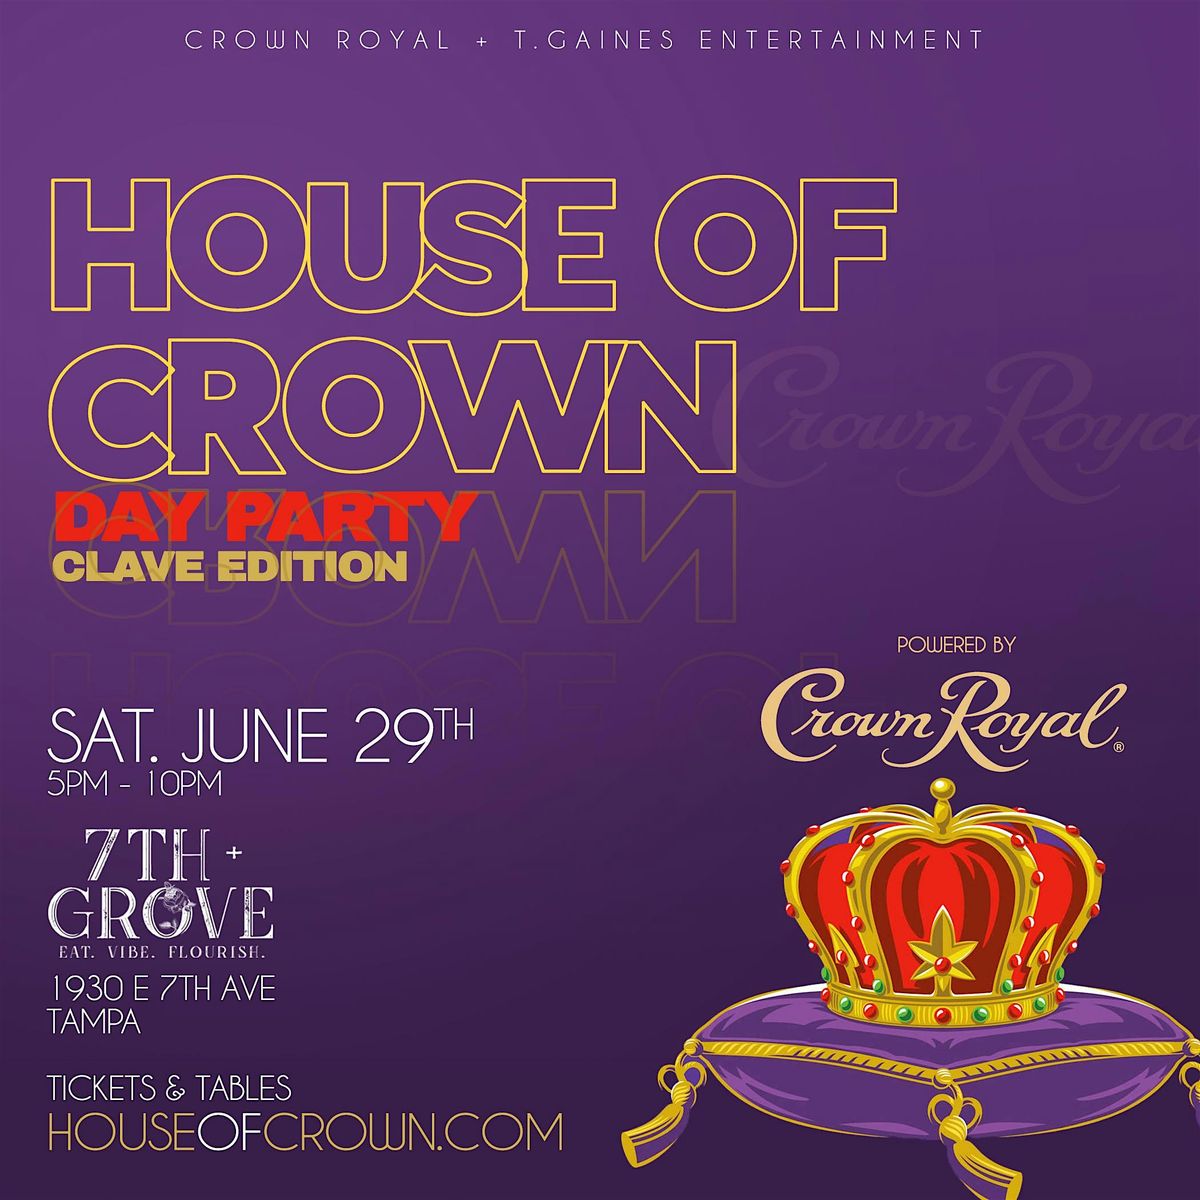 [House Of Crown] Day Party "Clave Edition" [Tampa]